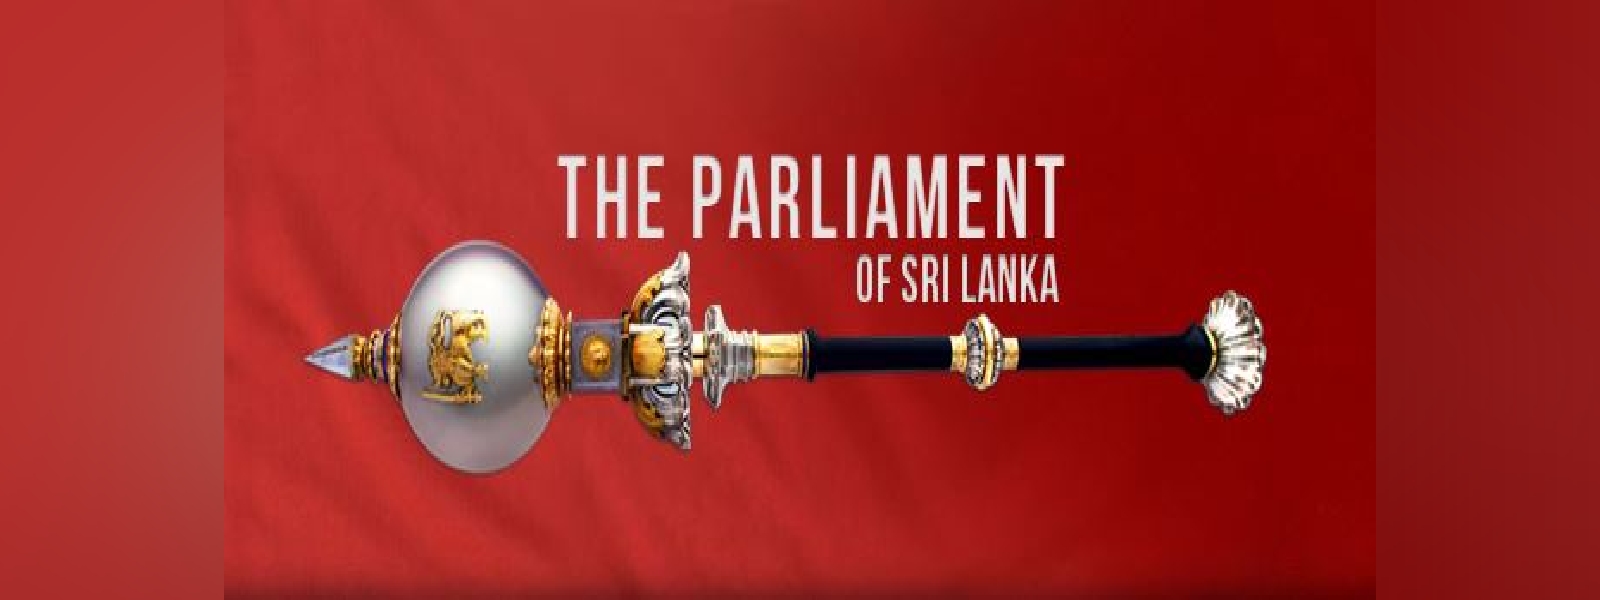 Parliament will ONLY meet today (22) this week